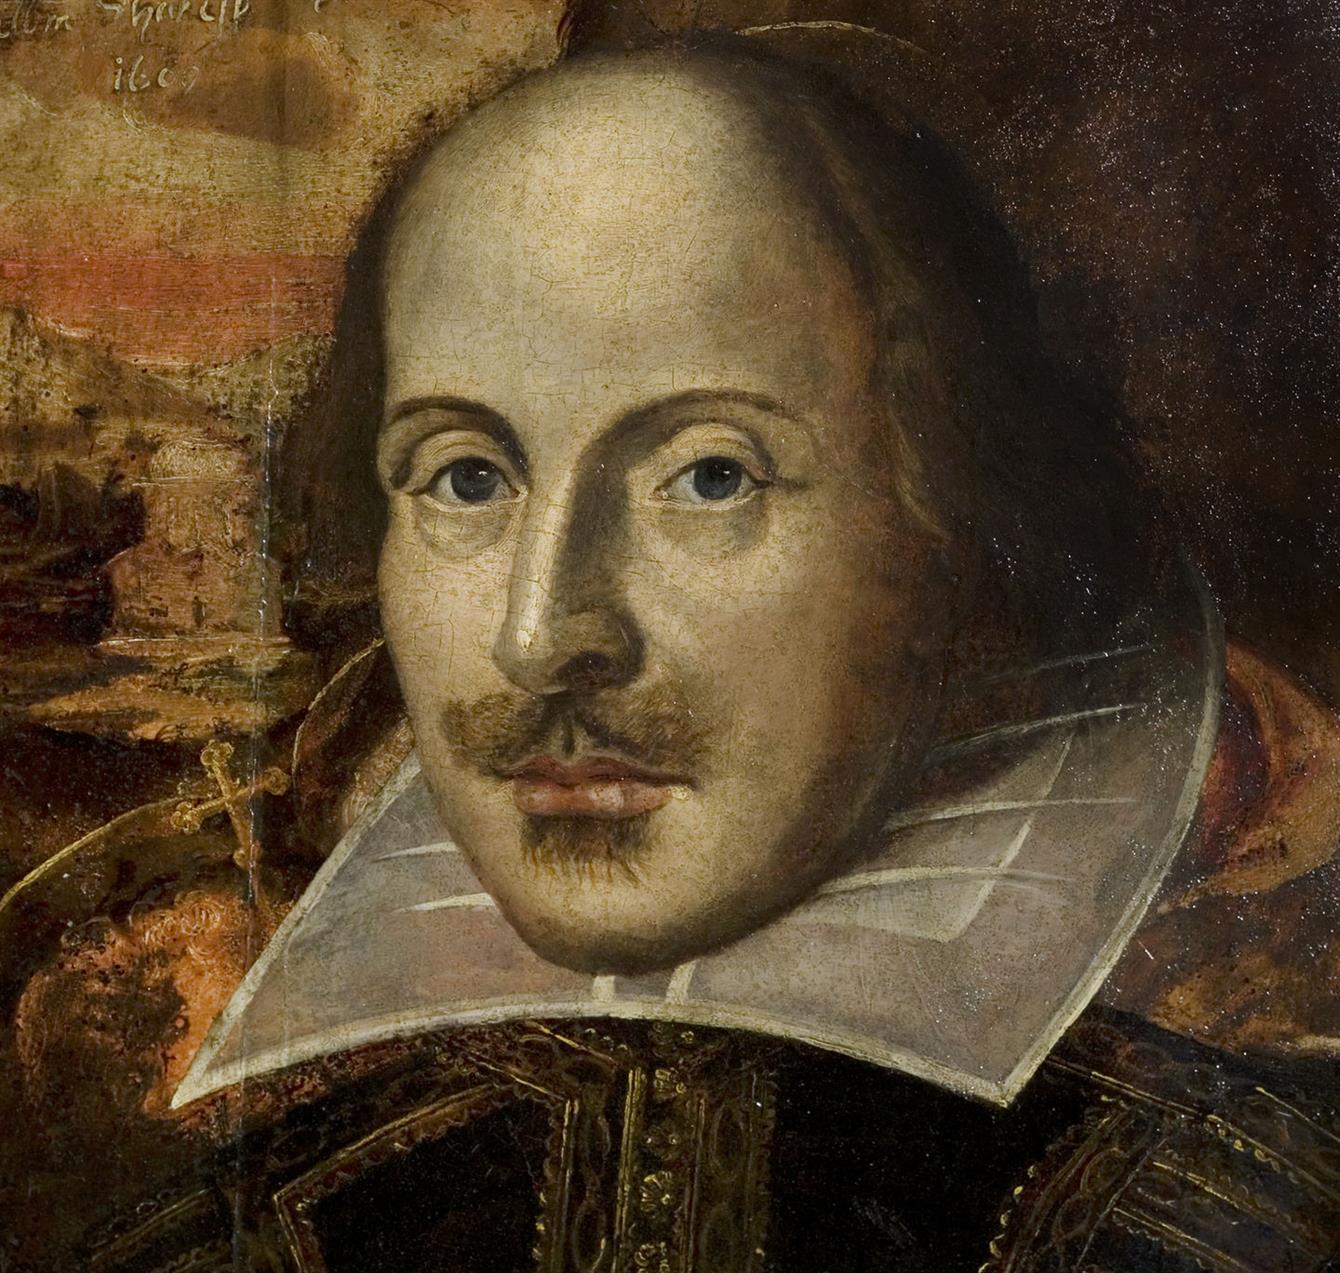 The World's Most Famous Playwright, Shakespeare Was a Homosexual - Theater Director Claims